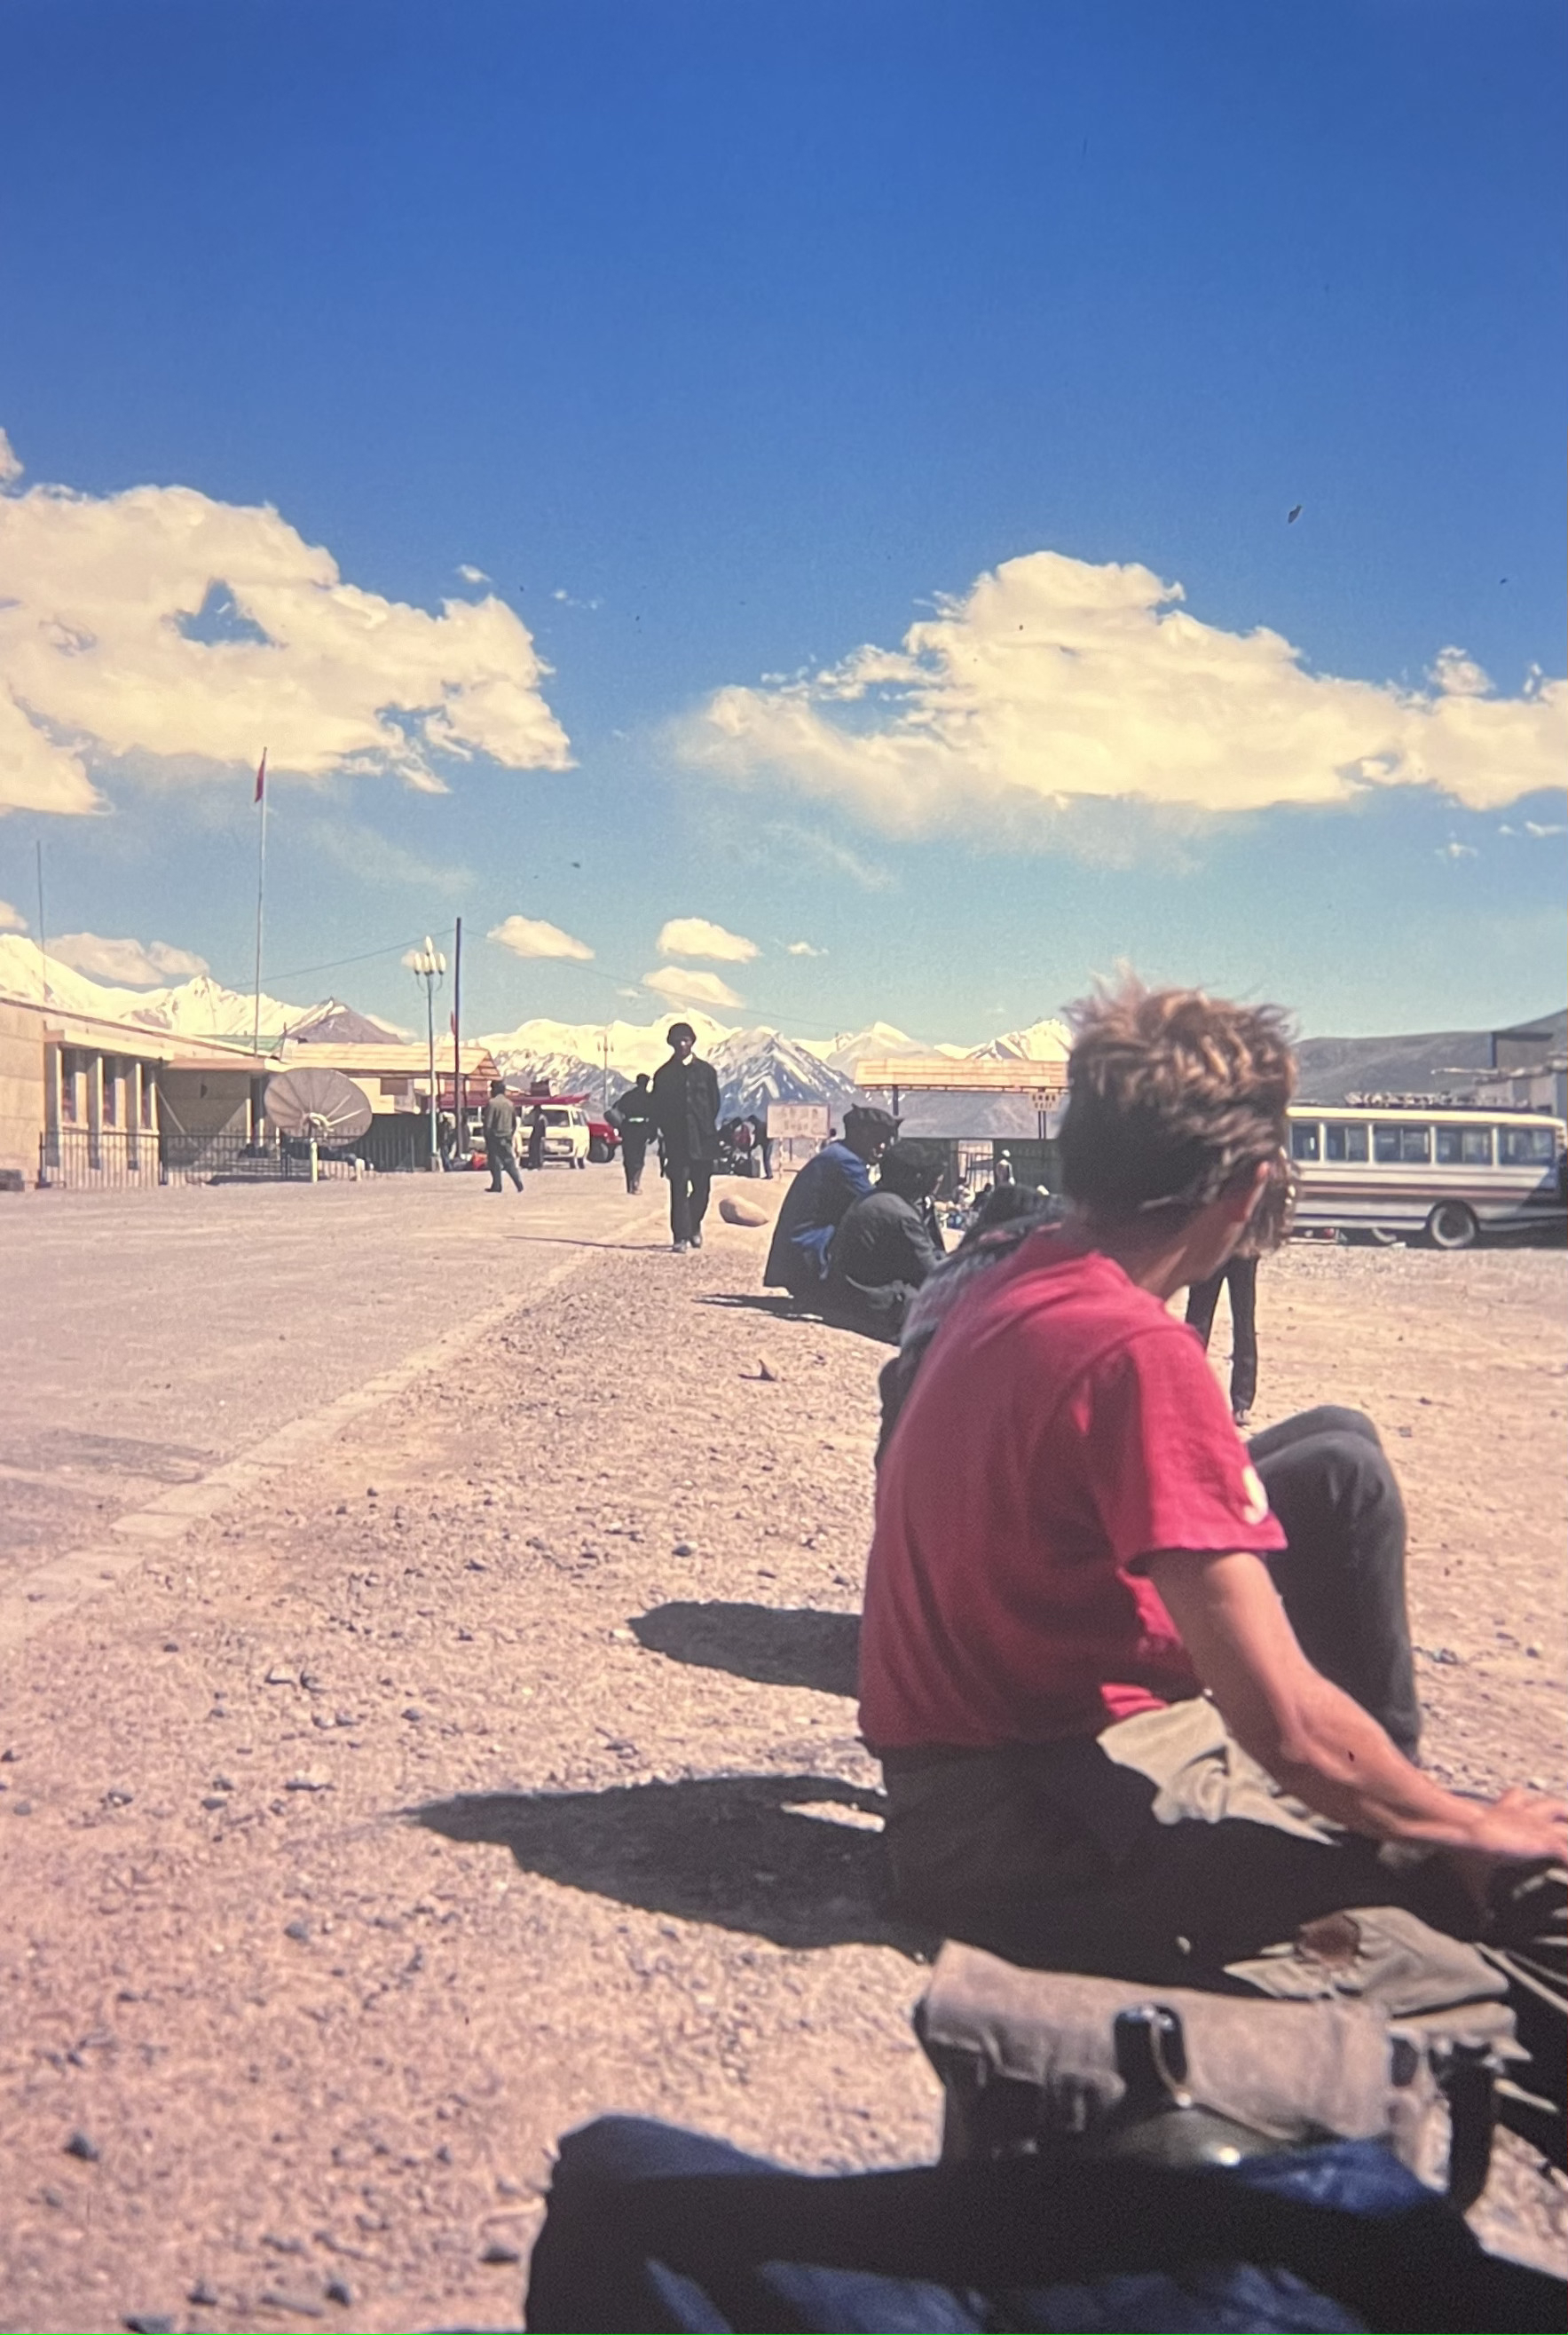 A person in a red shirt sits on the ground near a road with several others in the distance, under a bright blue sky with scattered clouds.